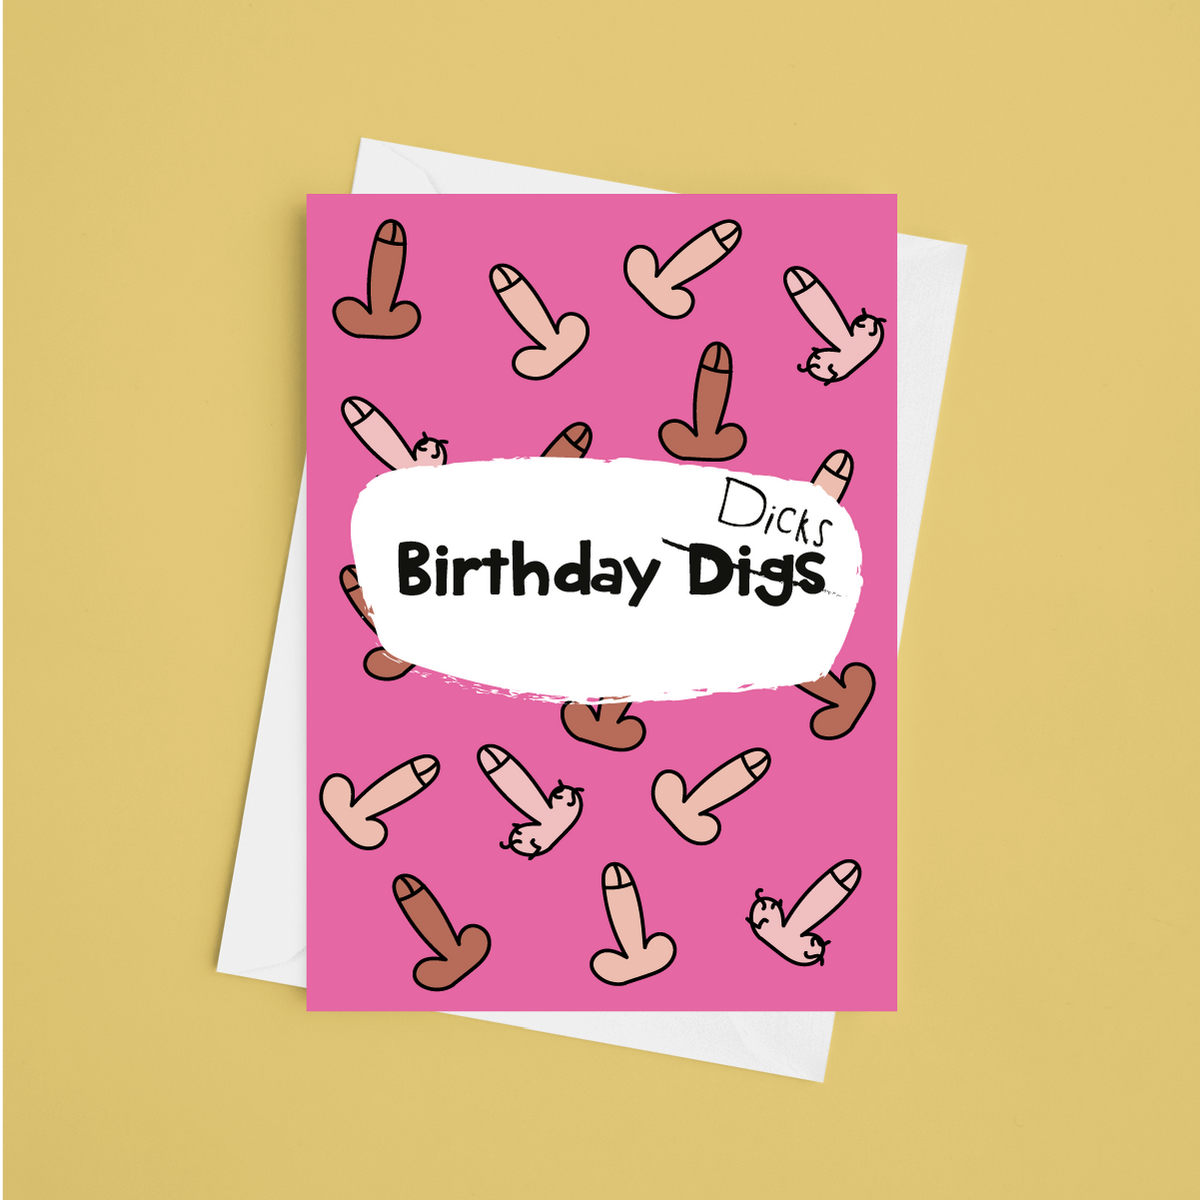 Happy Beer Day To You - Happy Birthday Card by Laura Lonsdale Designs